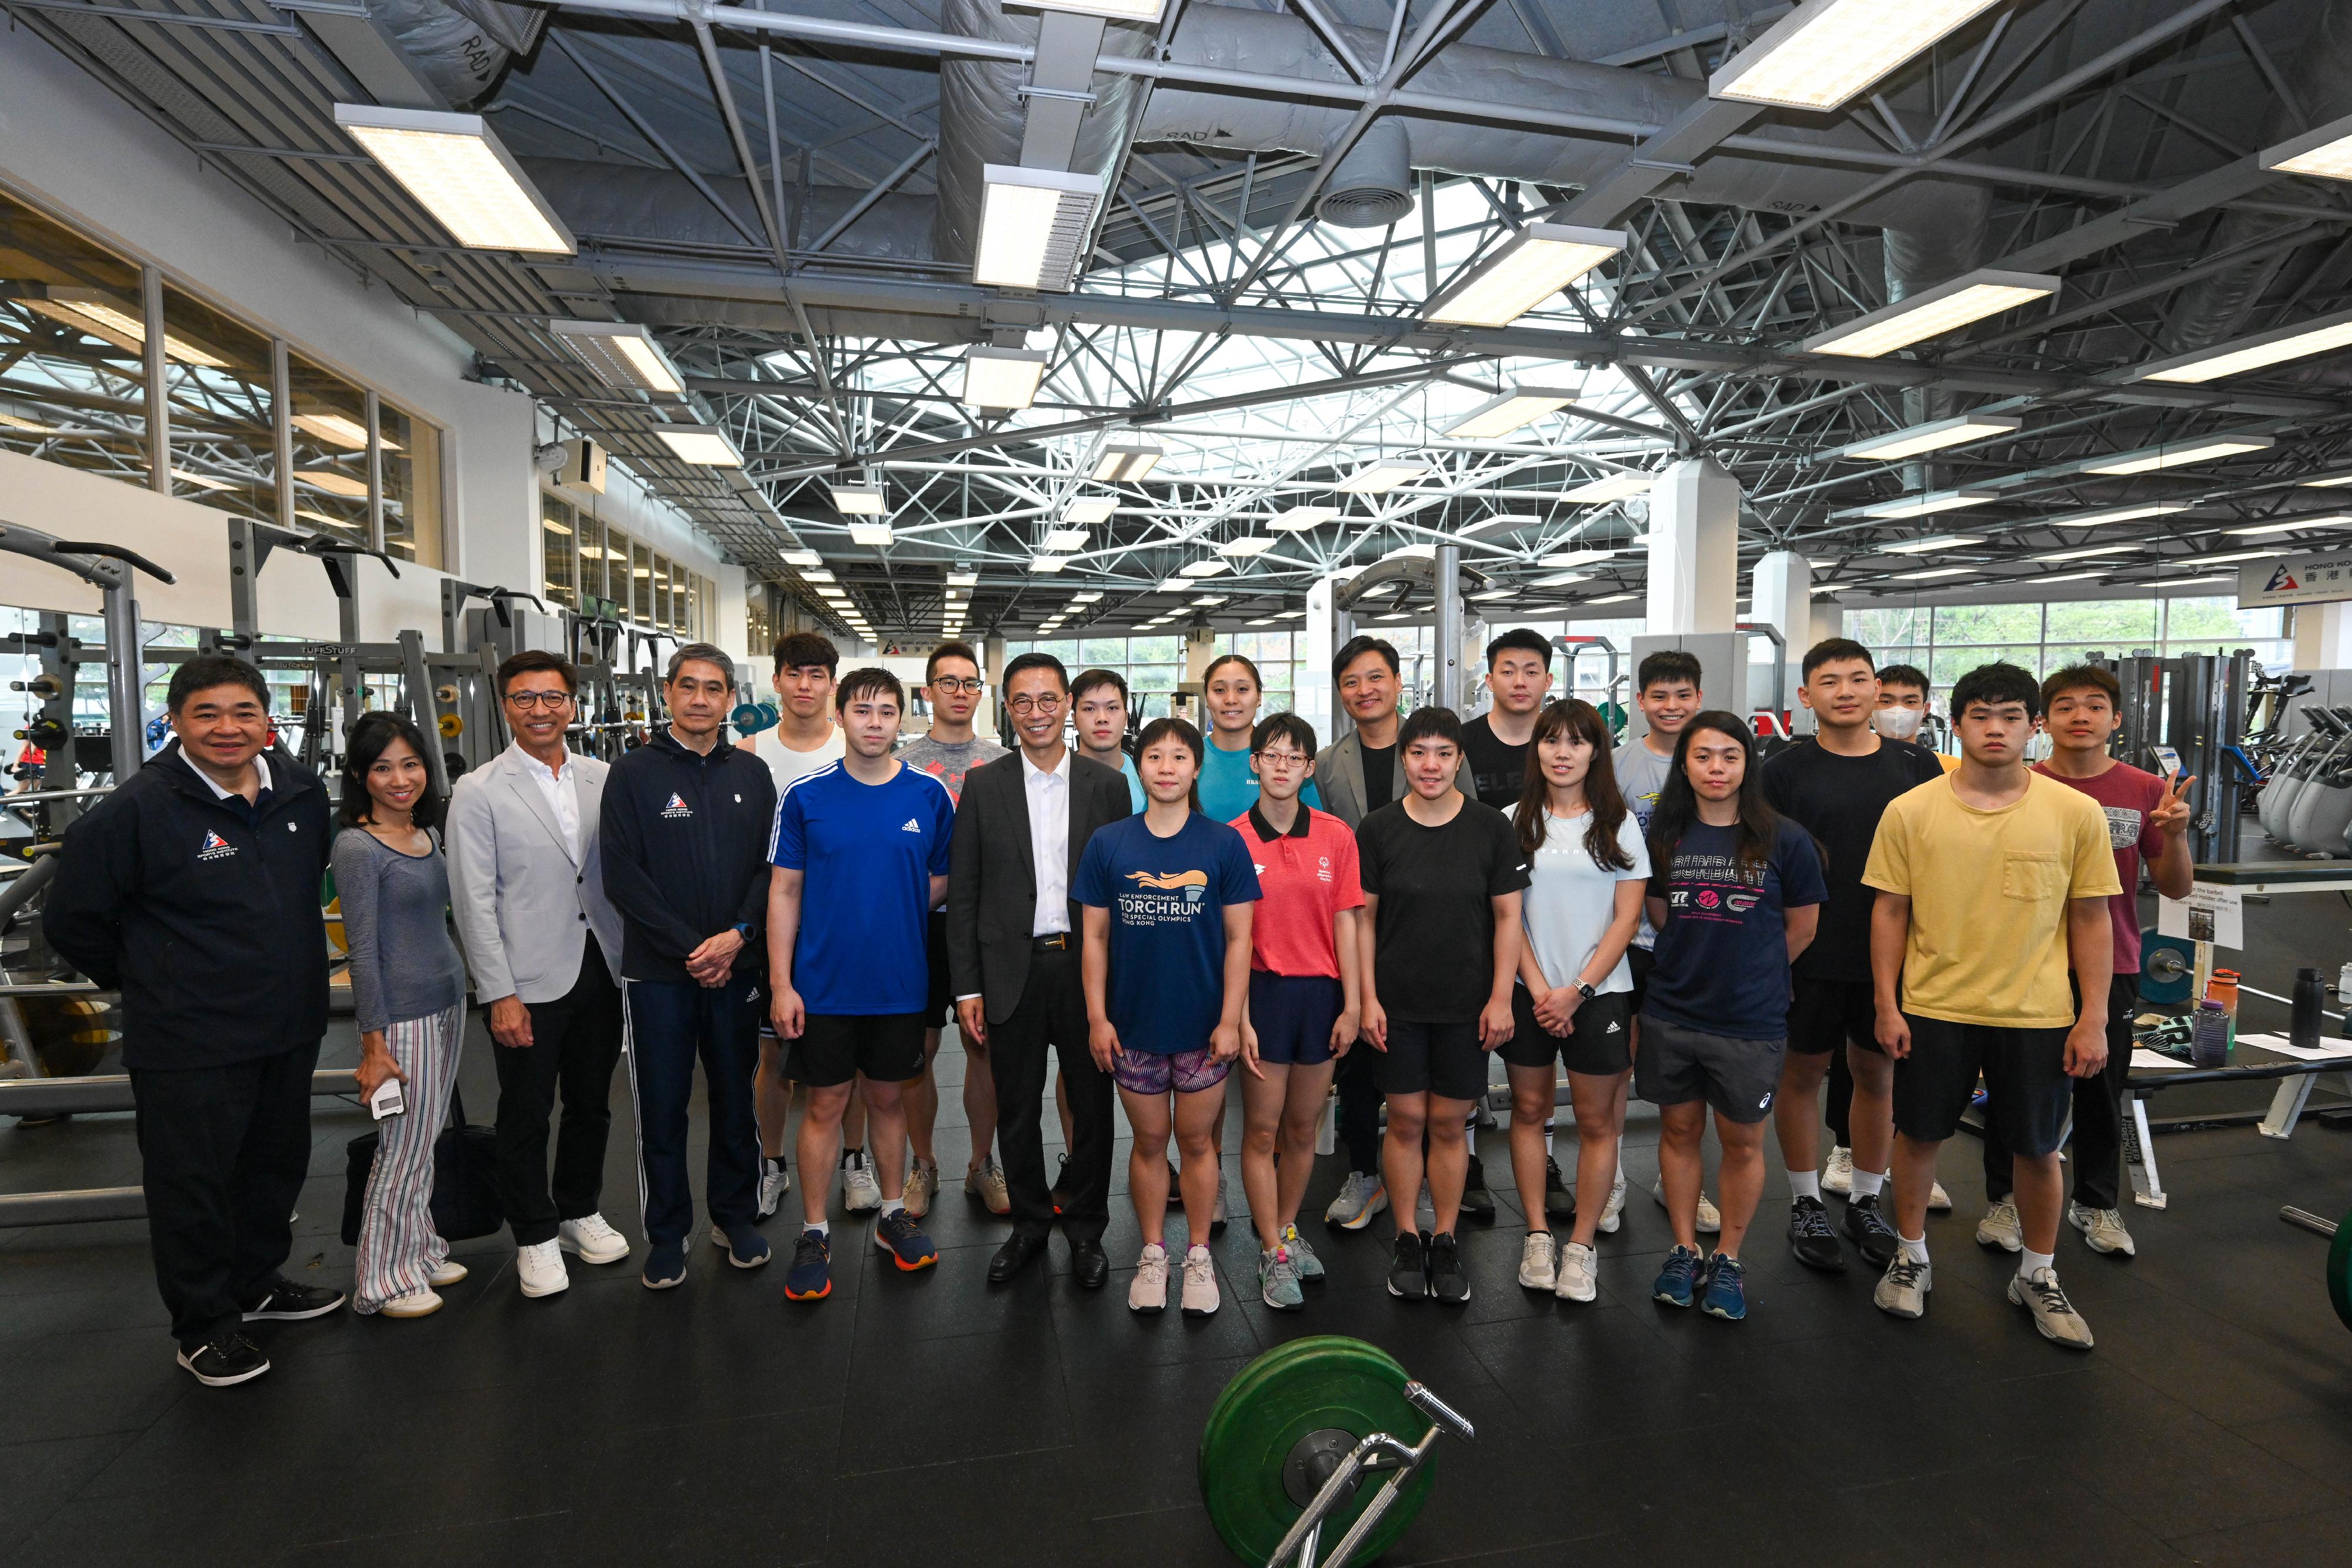 The Secretary for Culture, Sports and Tourism, Mr Kevin Yeung (sixth left, front row), and the Commissioner for Sports, Mr Sam Wong (third left, front row), this afternoon (May 27) visit the fitness training centre in the Hong Kong Sports Institute to show support to athletes while they prepare for the Olympic Games.